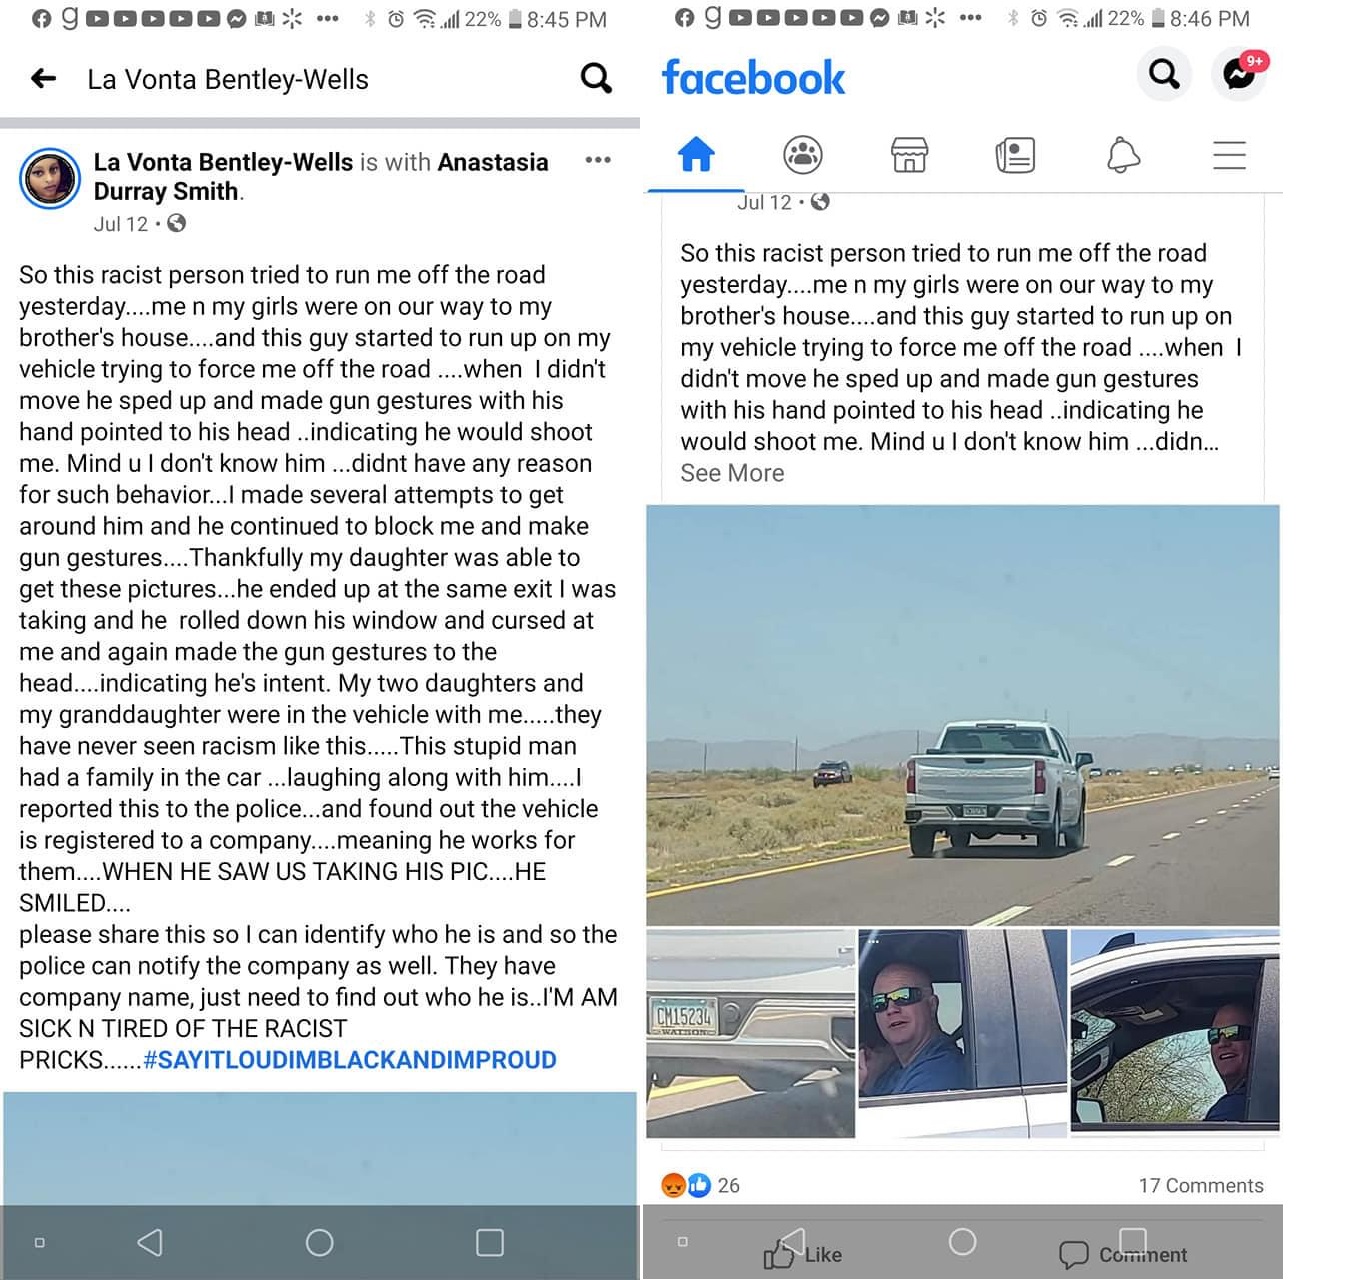 La Vonda Bentley-Wells was driving to her brother's house, when she encountered the man driving this white truck. The man began trying to run Bentley-Wells off the road, as she was driving with her two daughters, and granddaughter. As the man was going around her, Bentley-Wells shared to Facebook that he gave the gun symbol with his finger and aimed it at his head, threatening her. While he did this, the man's family was in the truck, laughing.